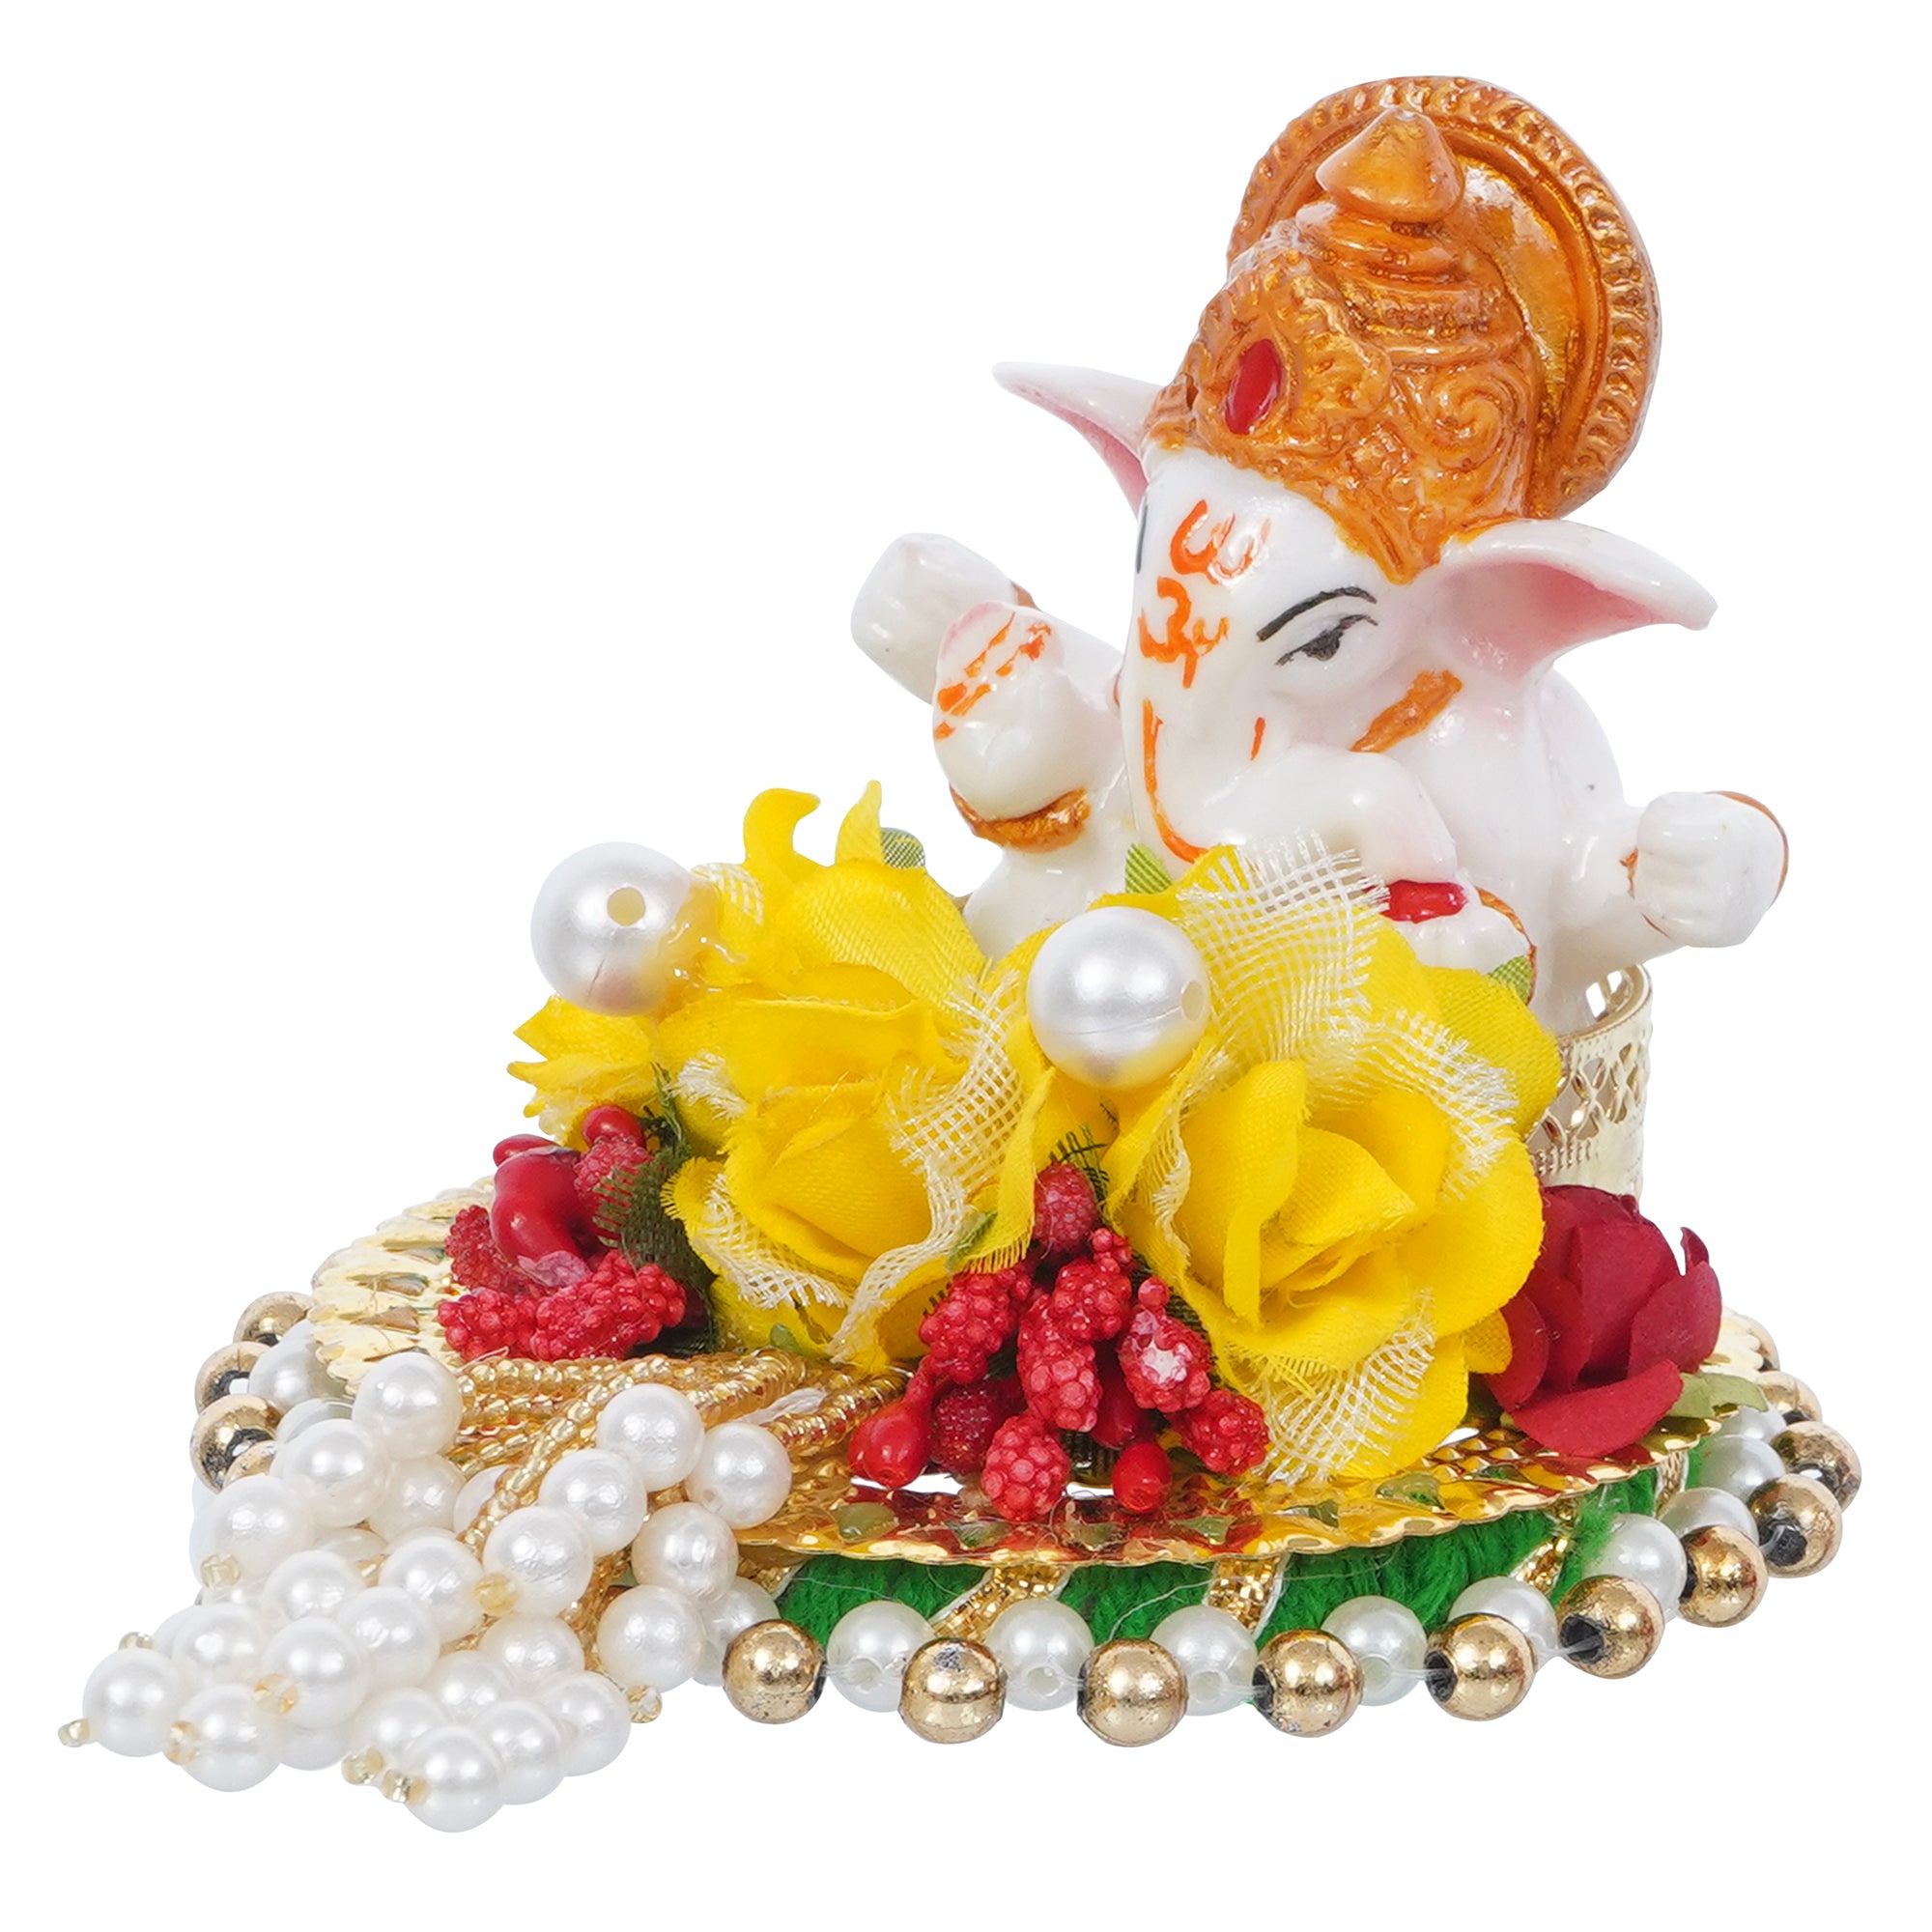 Lord Ganesha Idol on Decorative Handcrafted Plate with Colorful Flowers 5